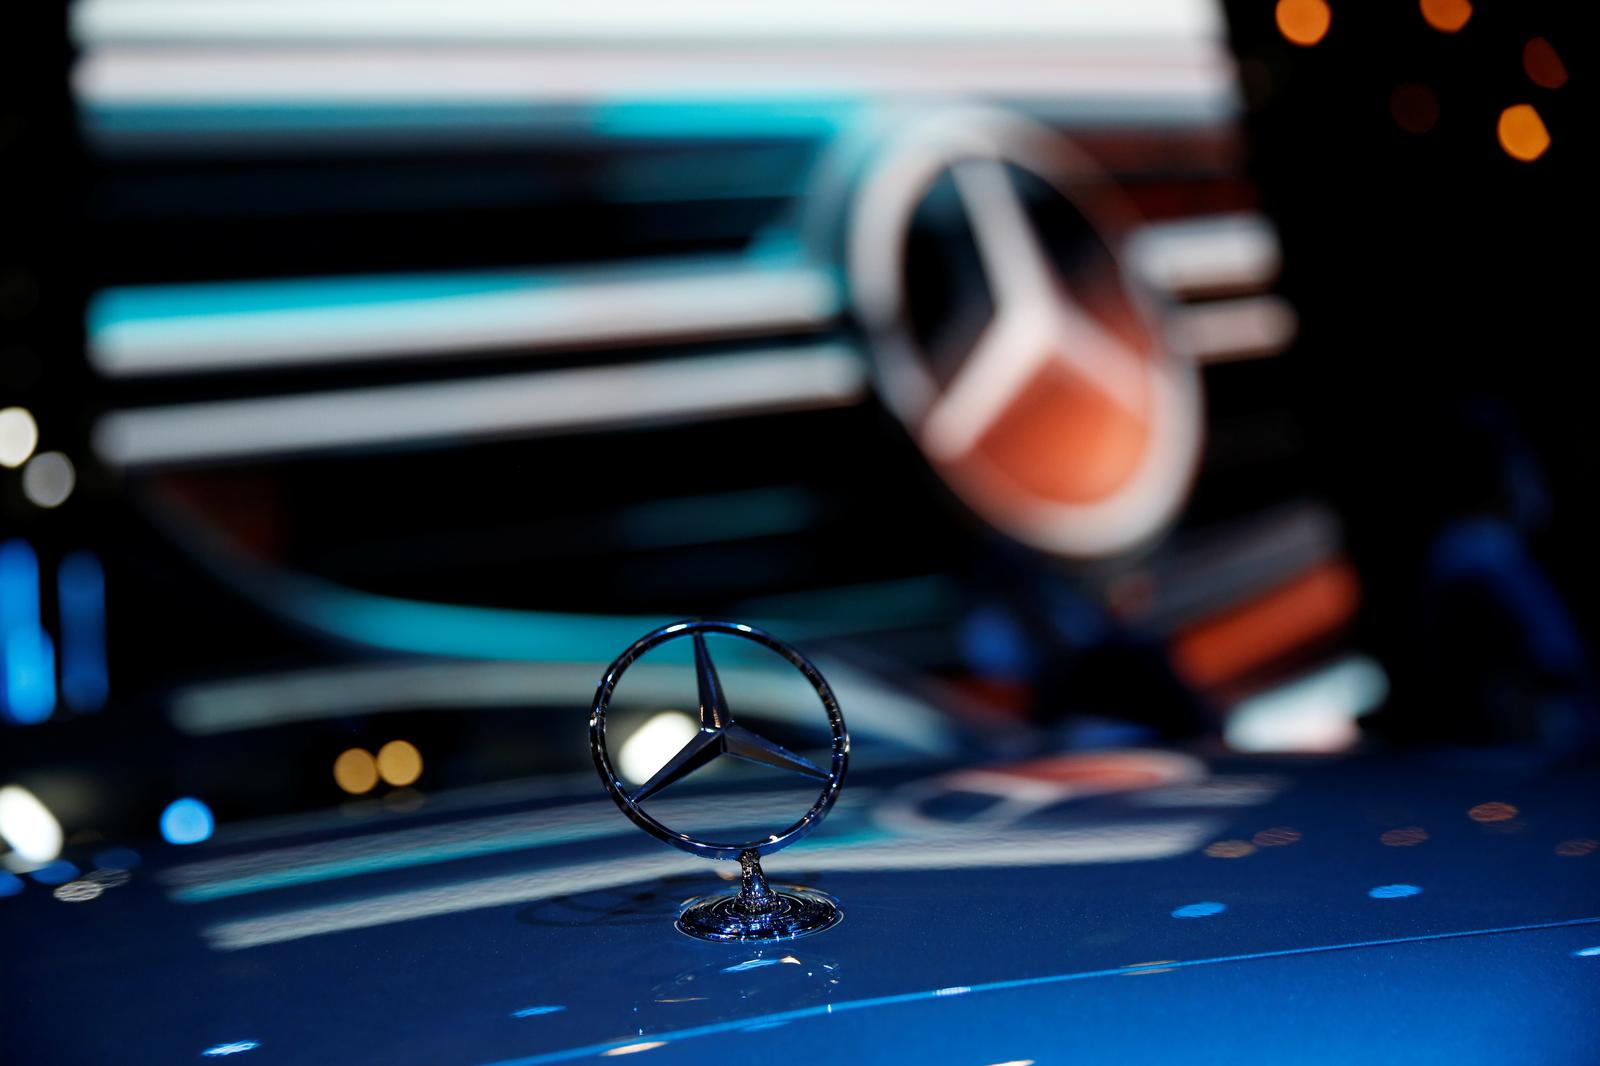 Daimler to recall 2.6 million Mercedes-Benz cars in China